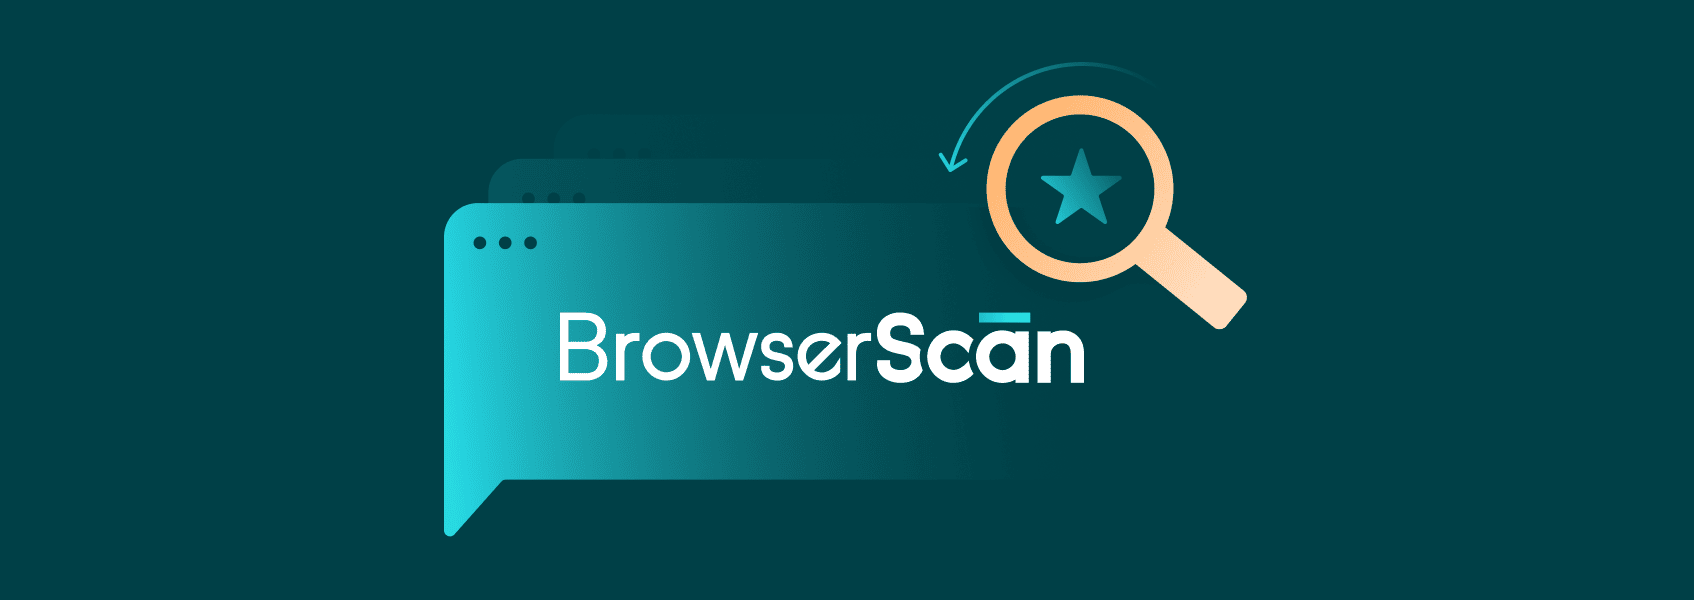 How to Verify Your Browser Fingerprint Using BrowserScan